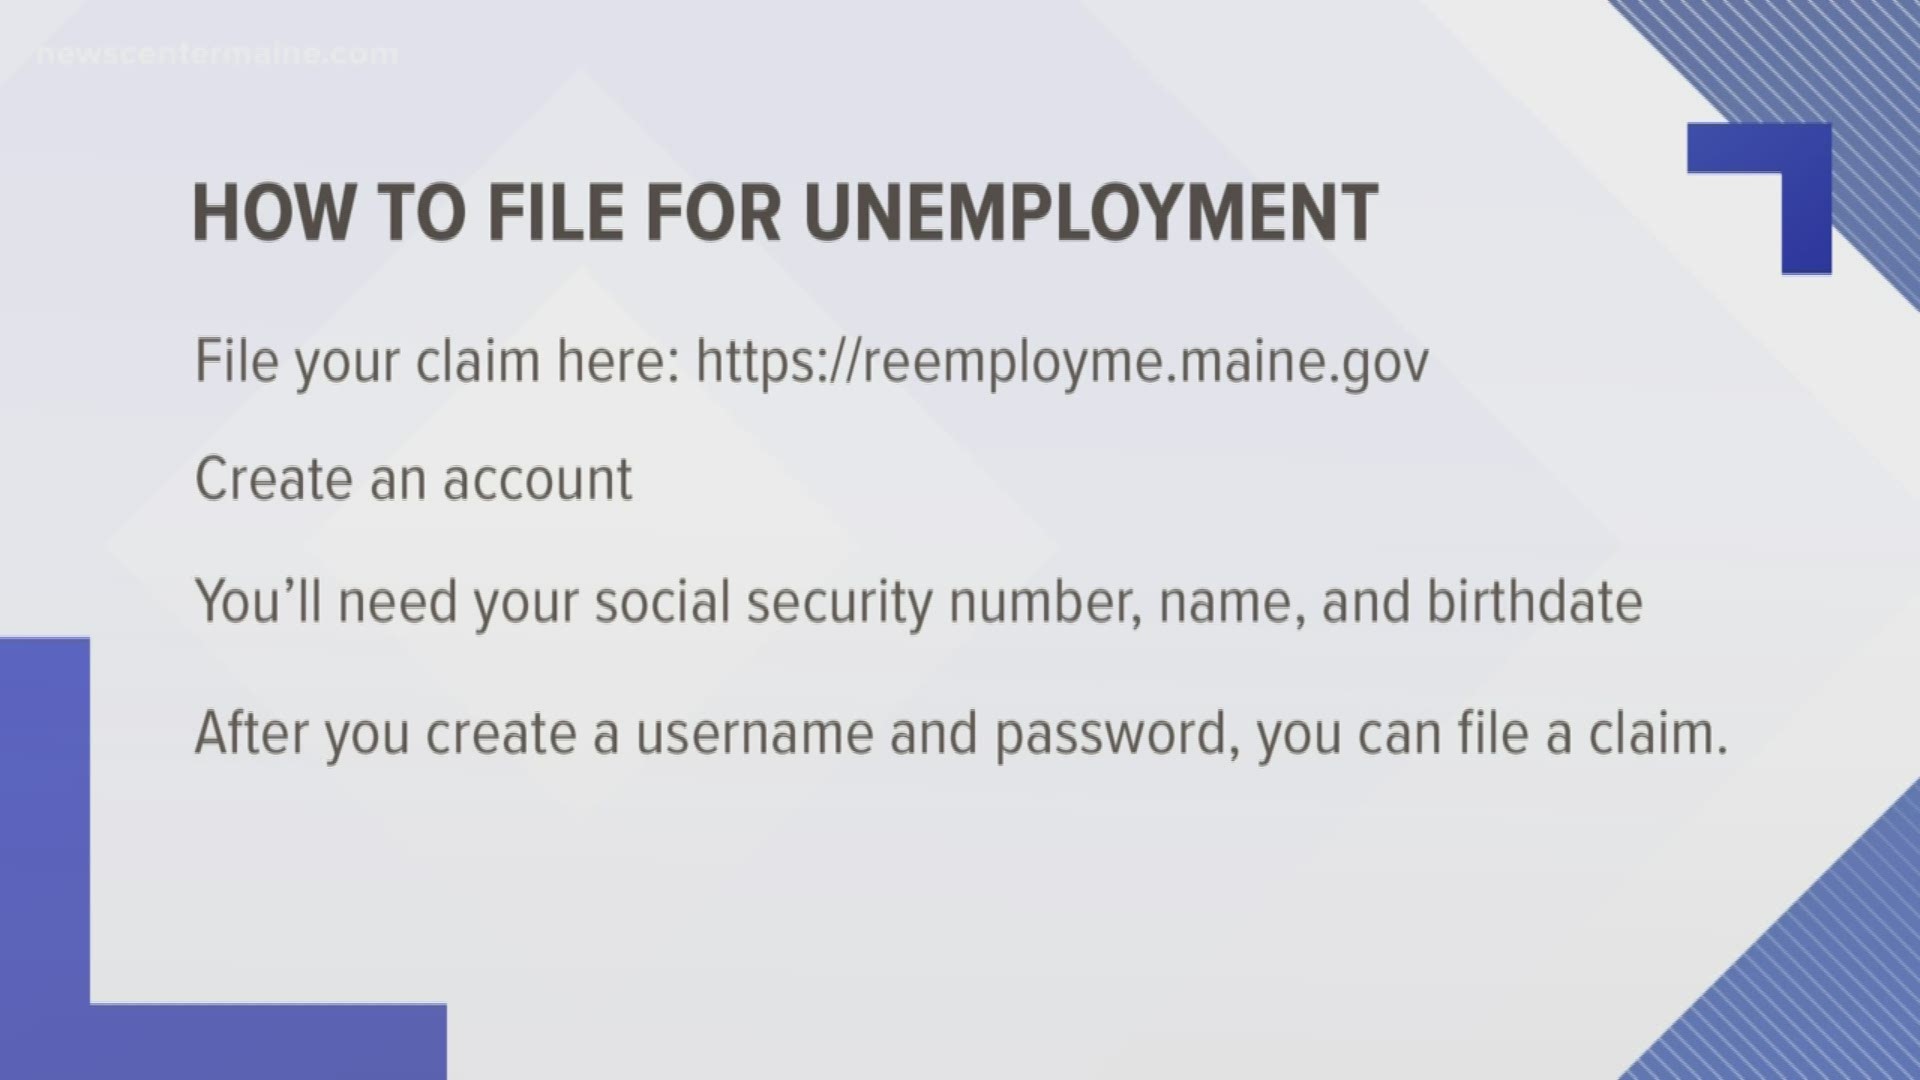 How to file for unemployment in Maine due to coronavirus